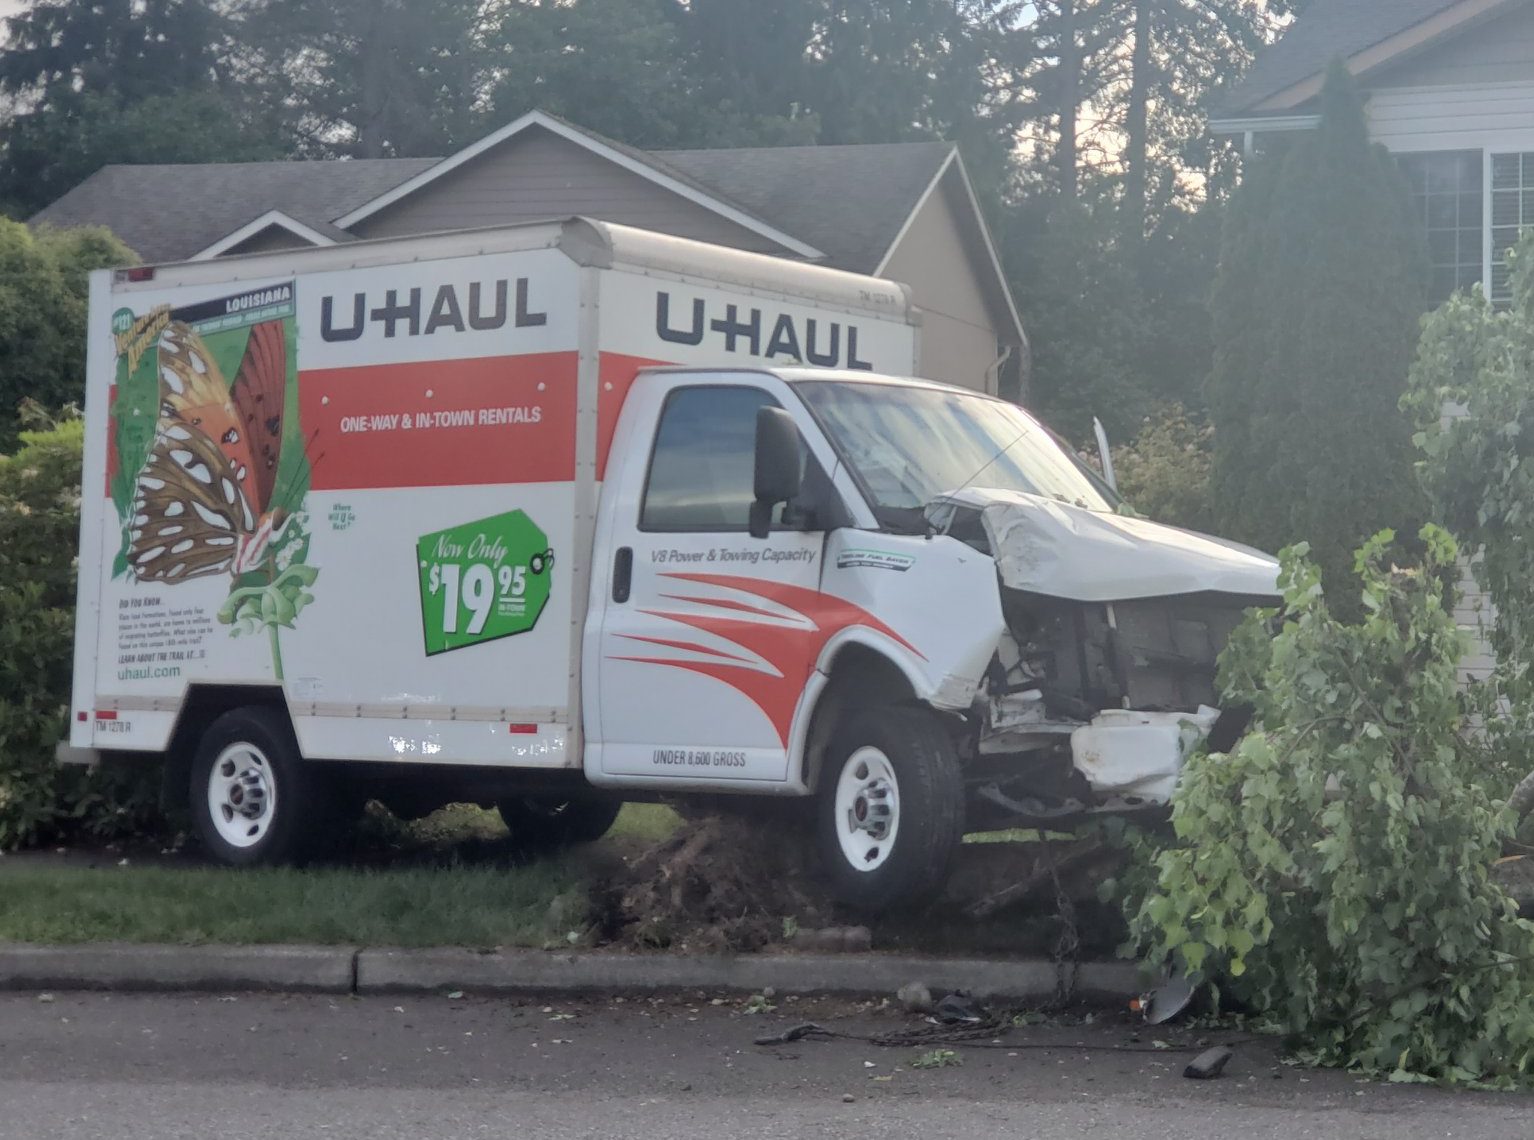 Uhaul accident and if you are covered on your auto insurance while renting one? The Miller Insurance Agency - Everett, WA